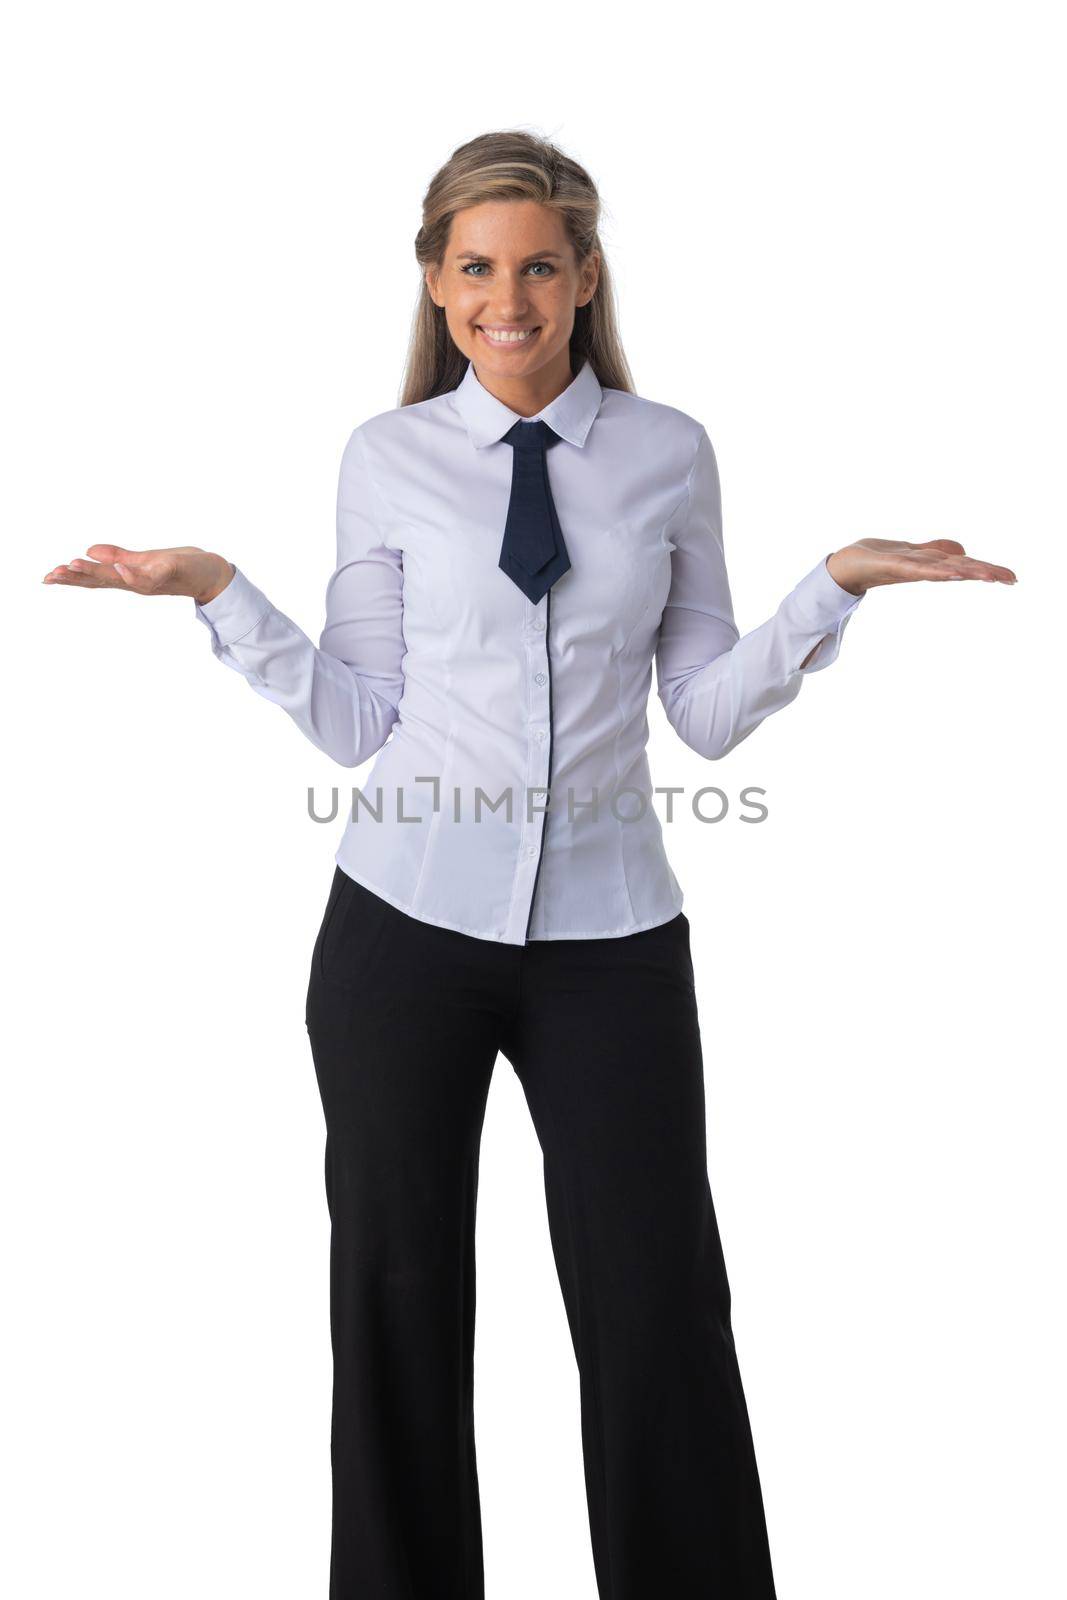 Business woman holding hands out by ALotOfPeople